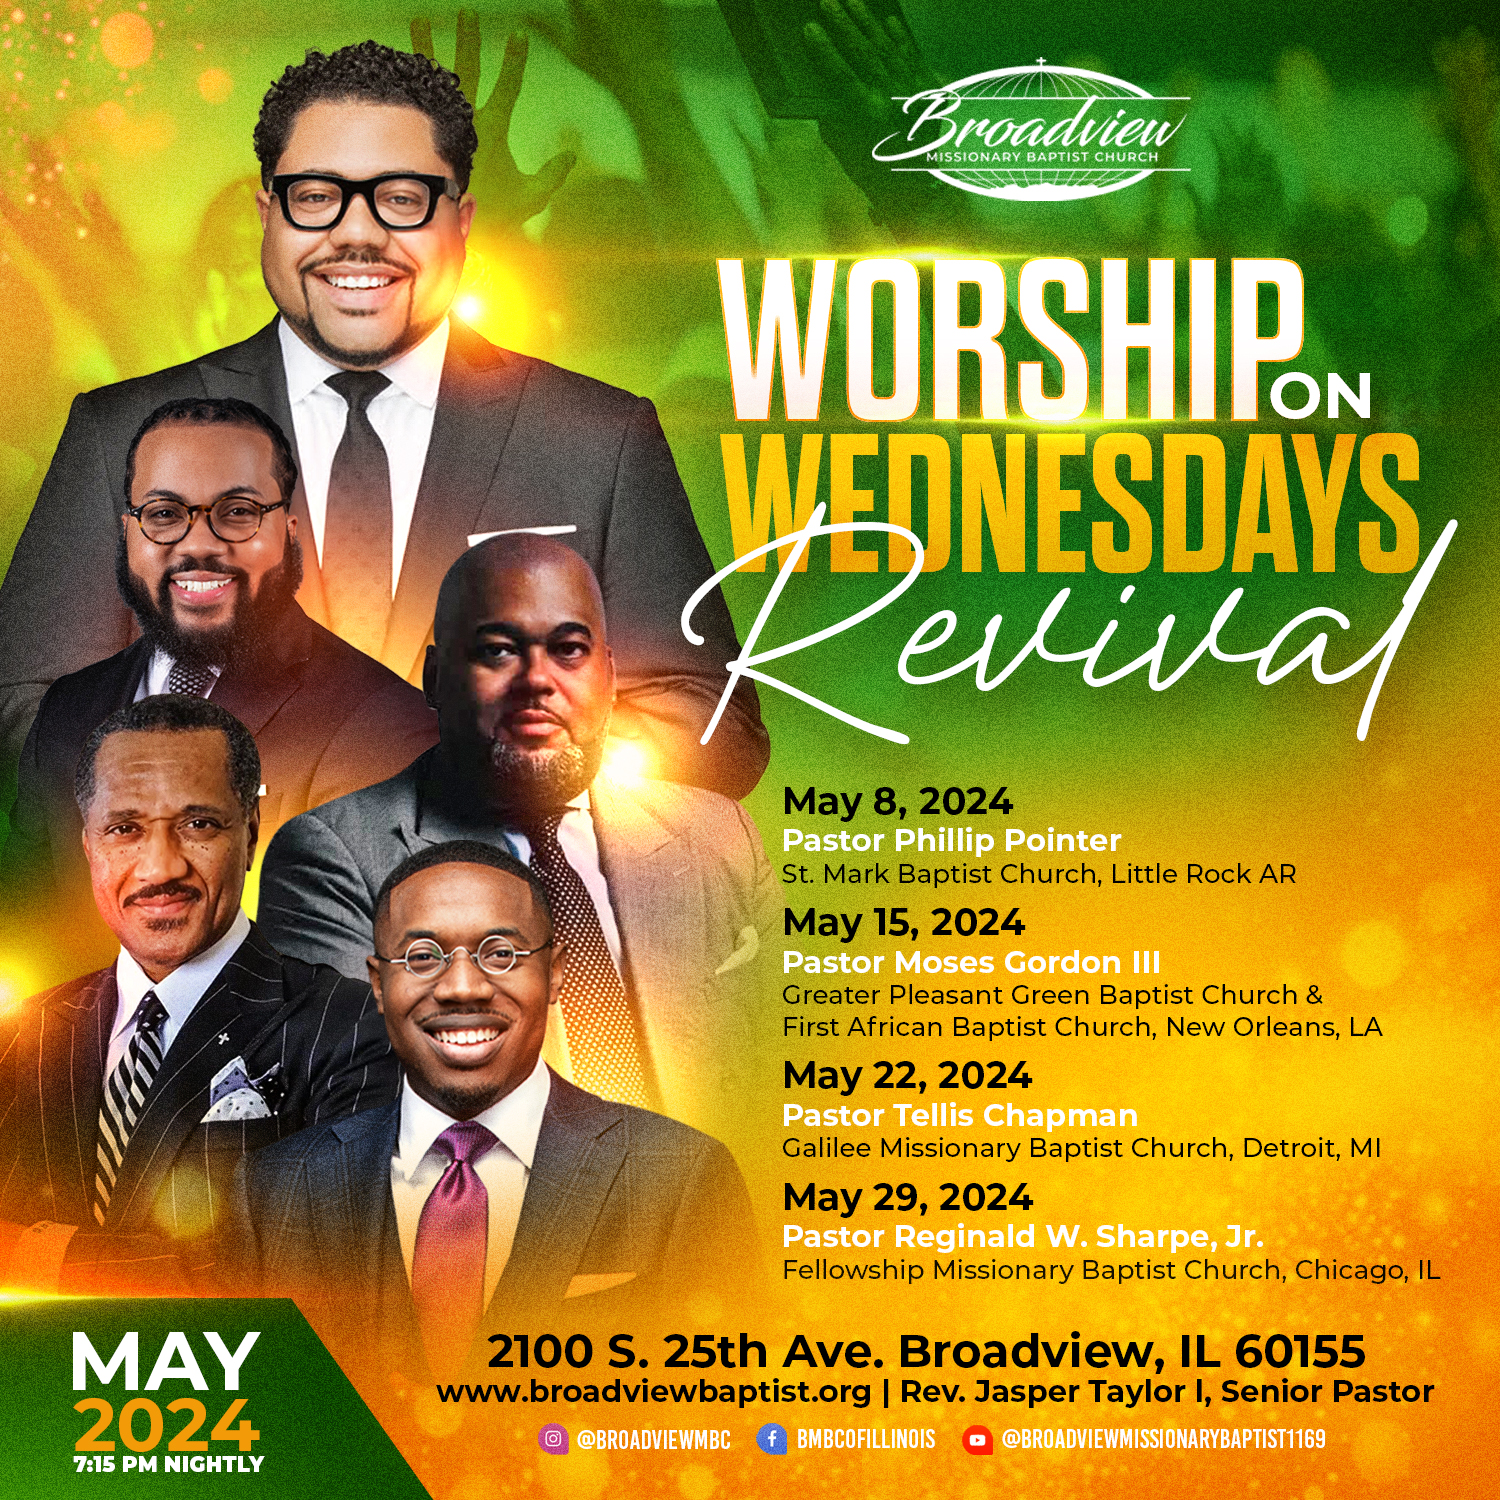 Broadview Worship on Wednesday Revival Graphic 1x1 1